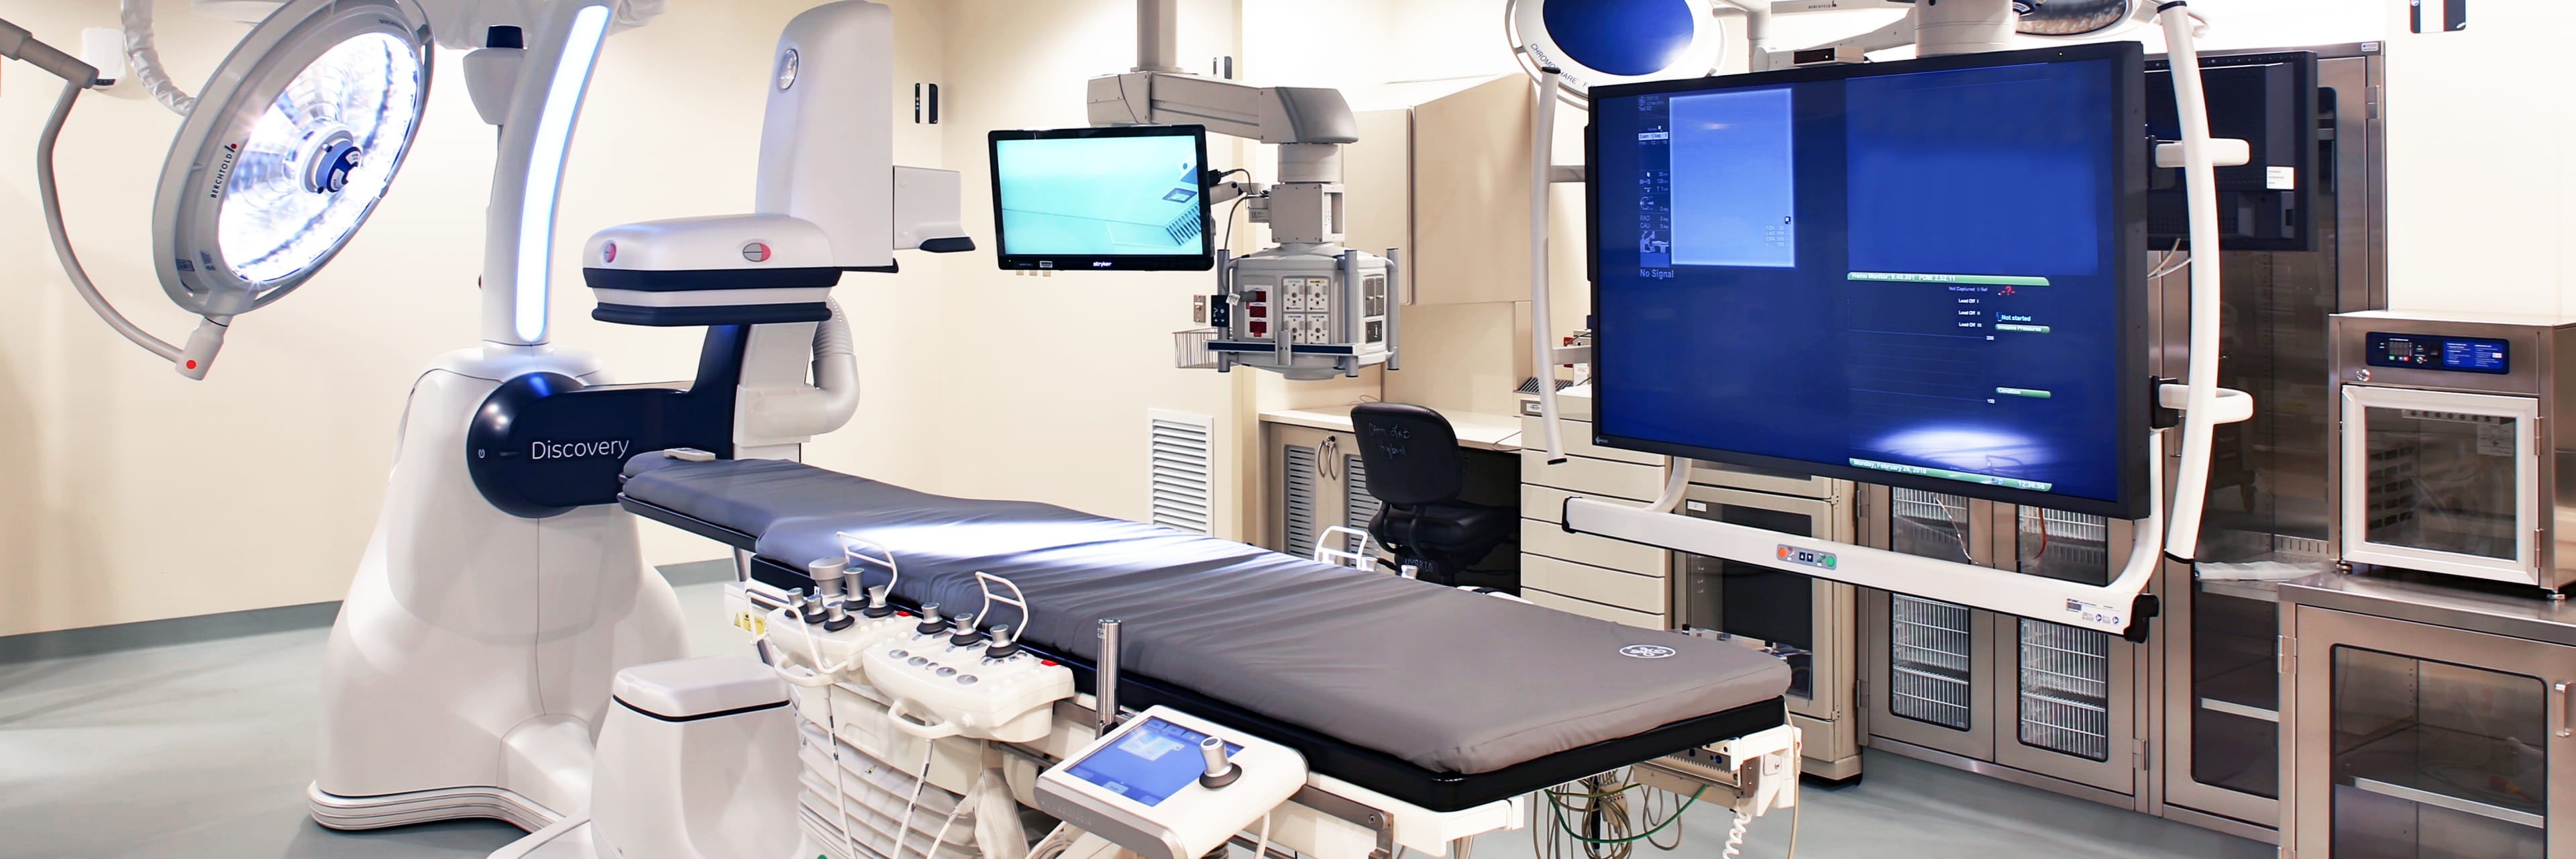 Baptist Heart hospital state-of-the-art hybrid structural lab and OR suite